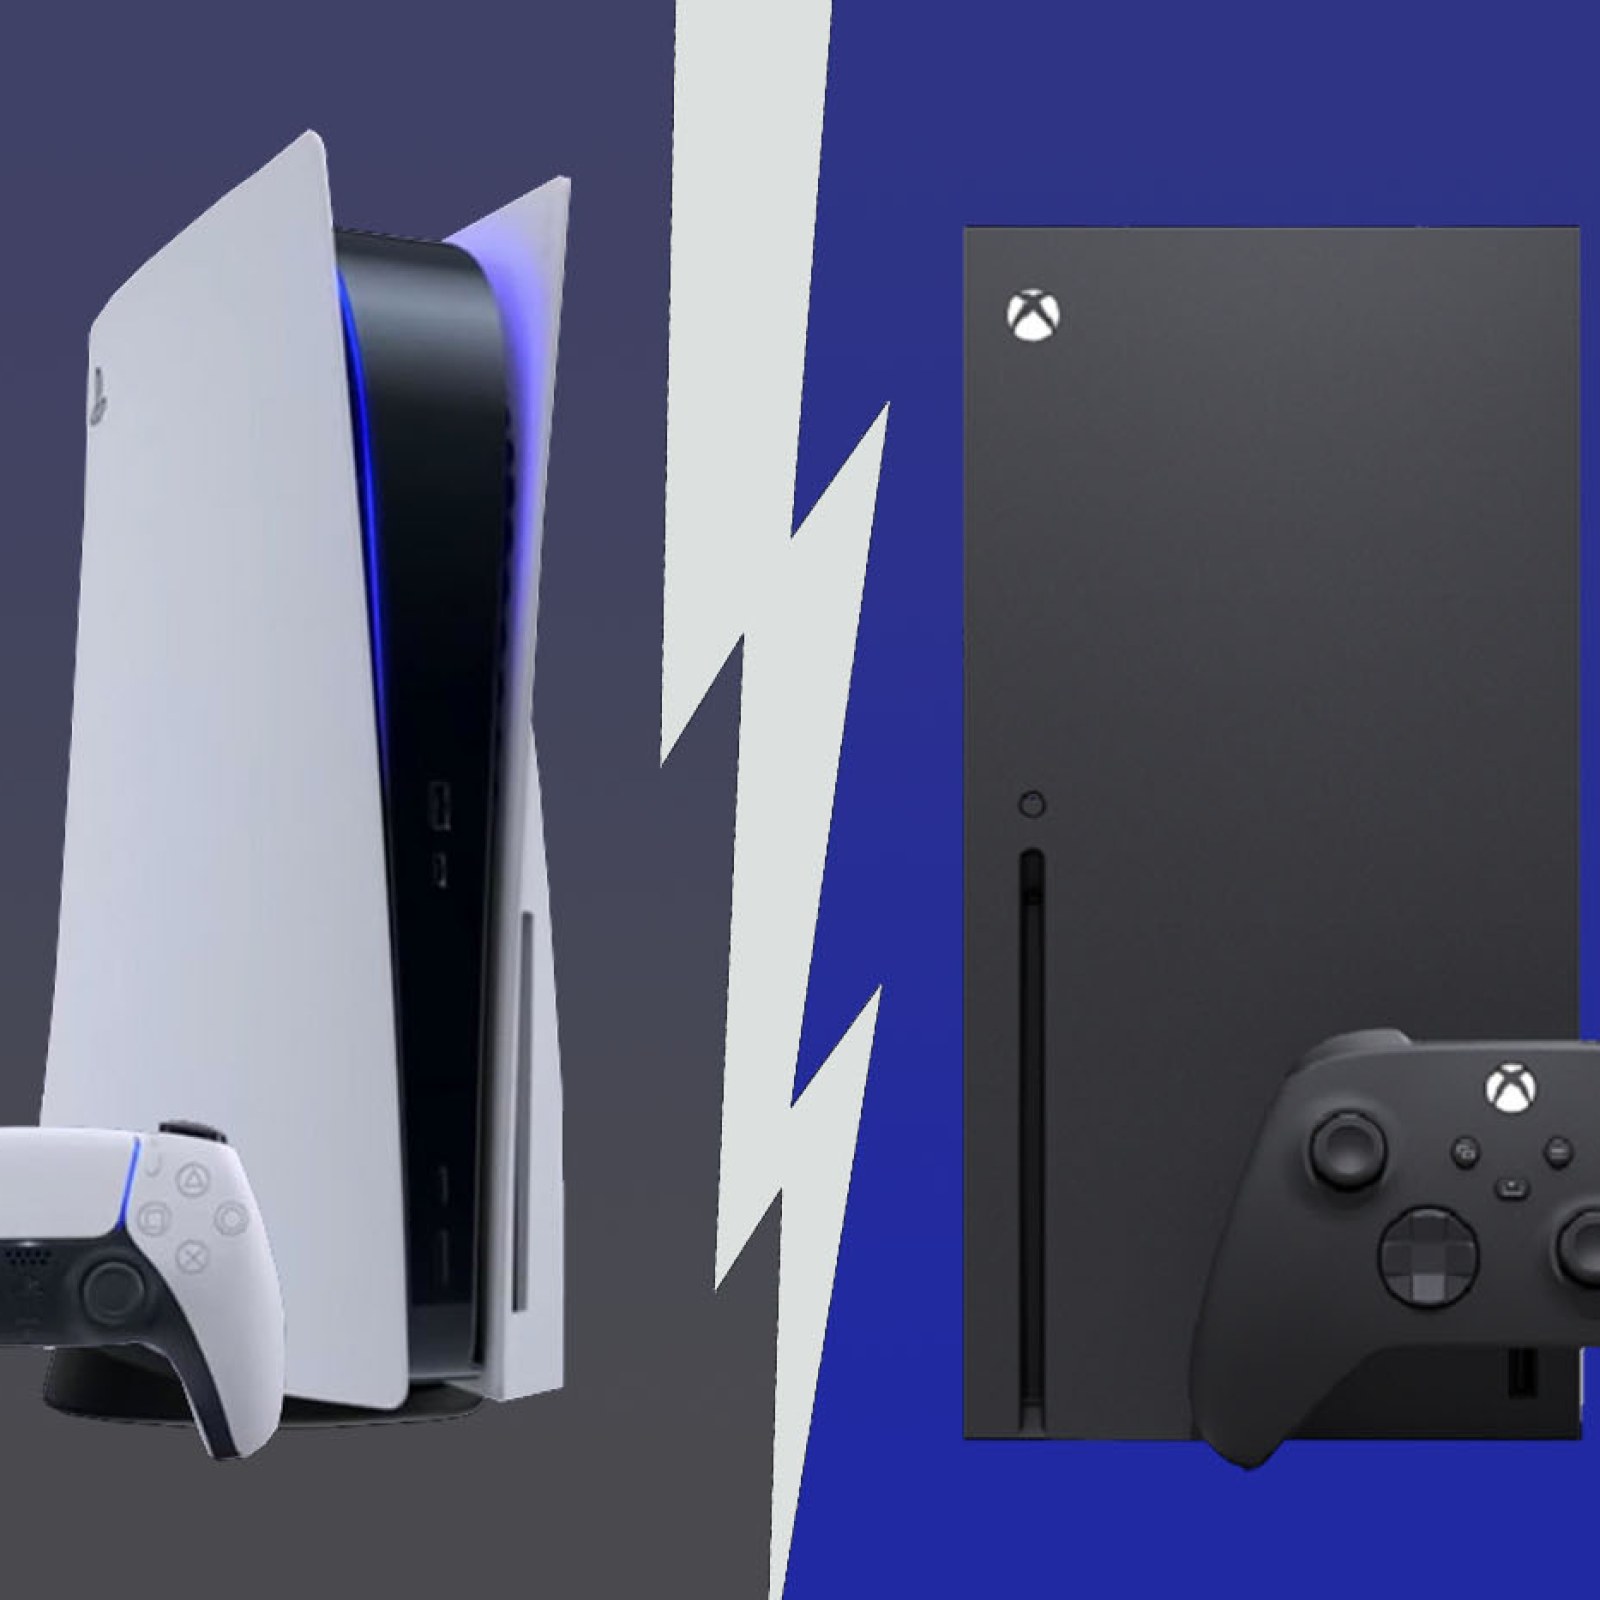 PS5 vs Xbox Series X: Which should you buy?